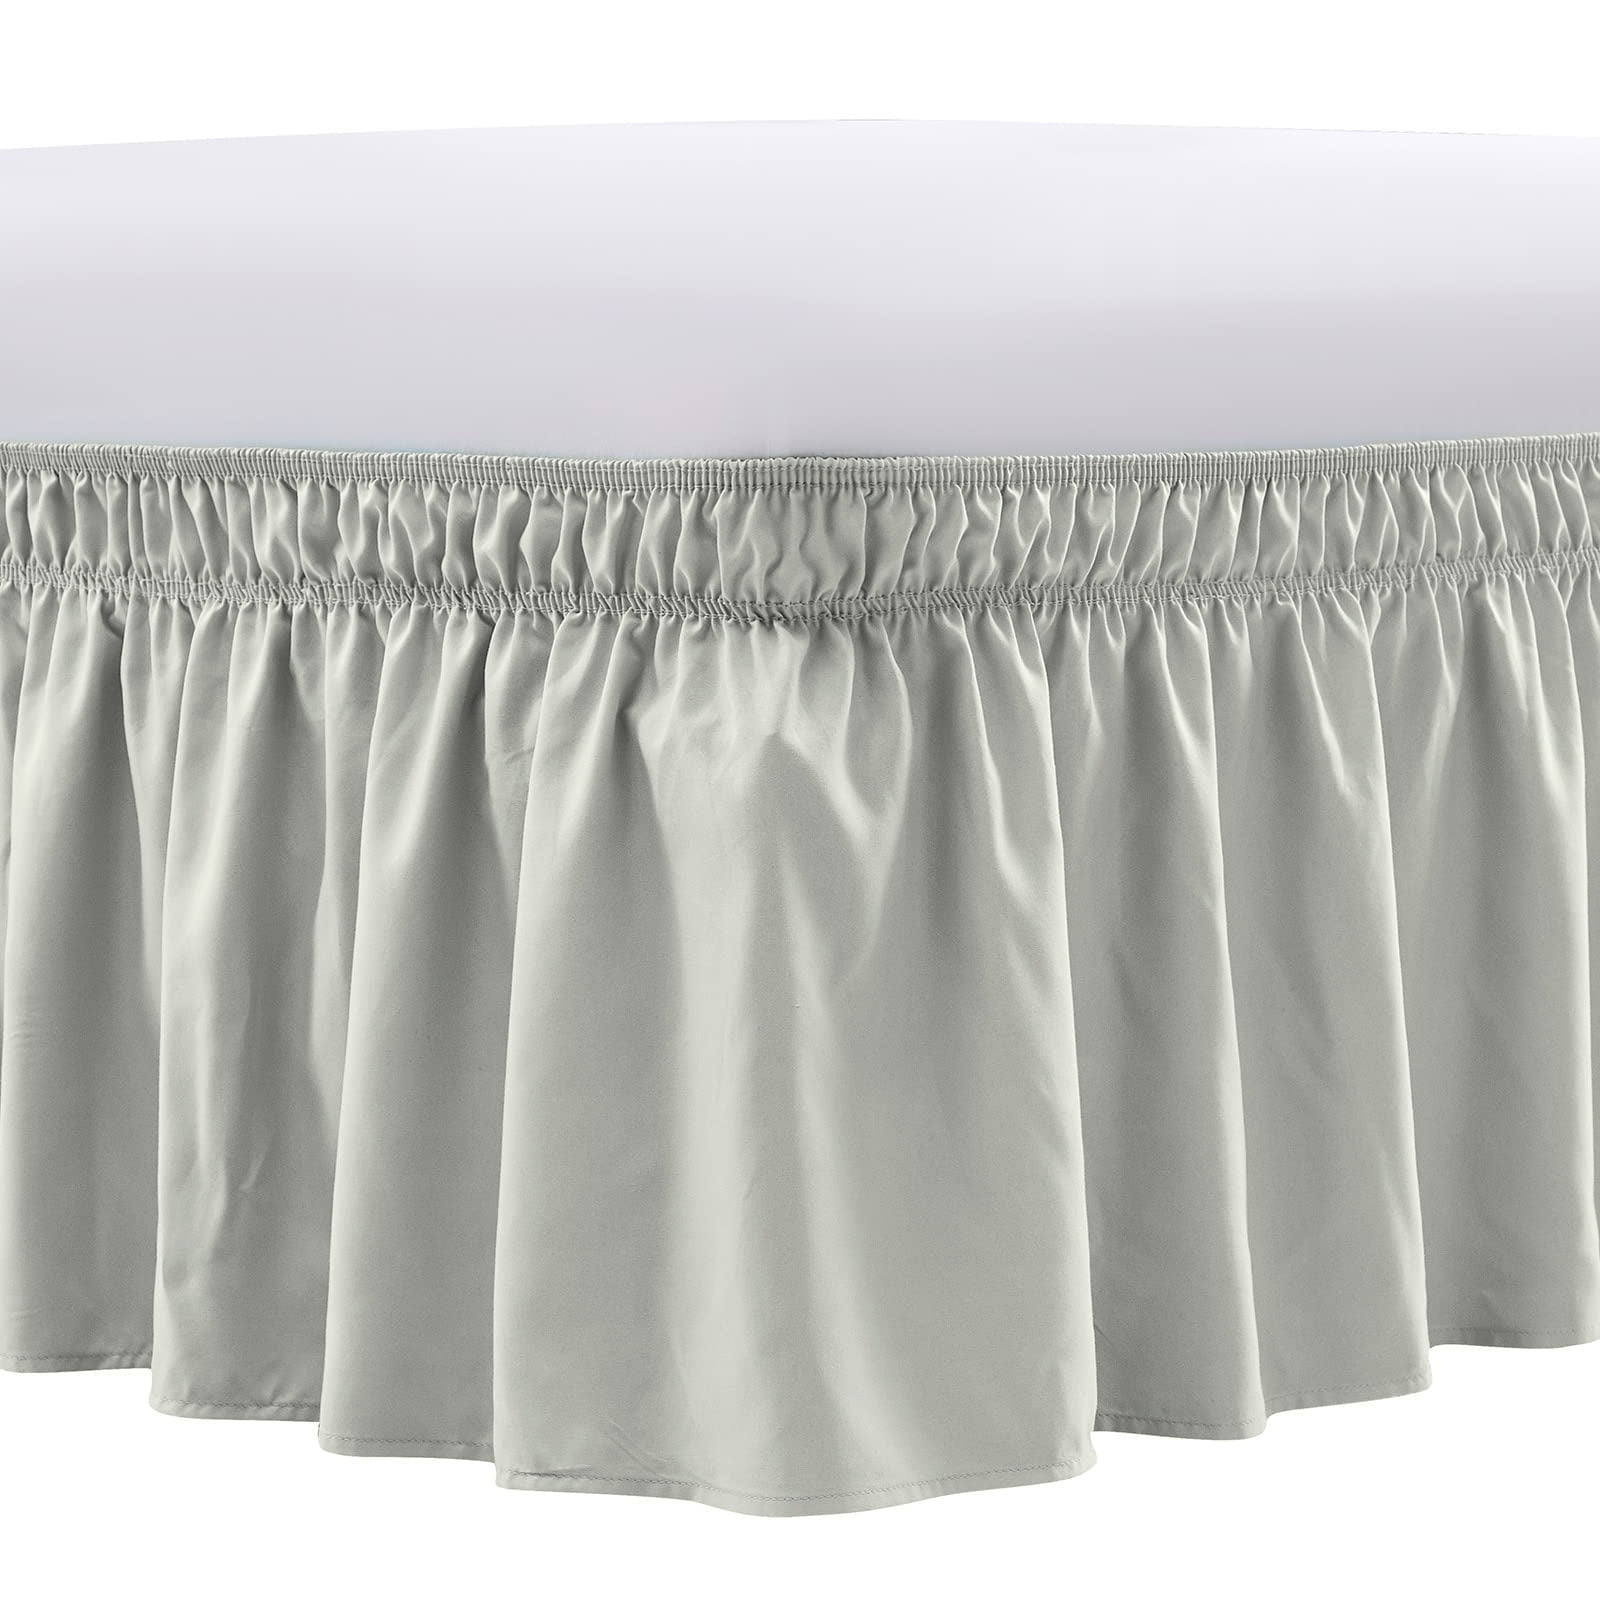 NEWEEN Wrap Around Bed Skirts for Queen Beds 15 Inches Drop